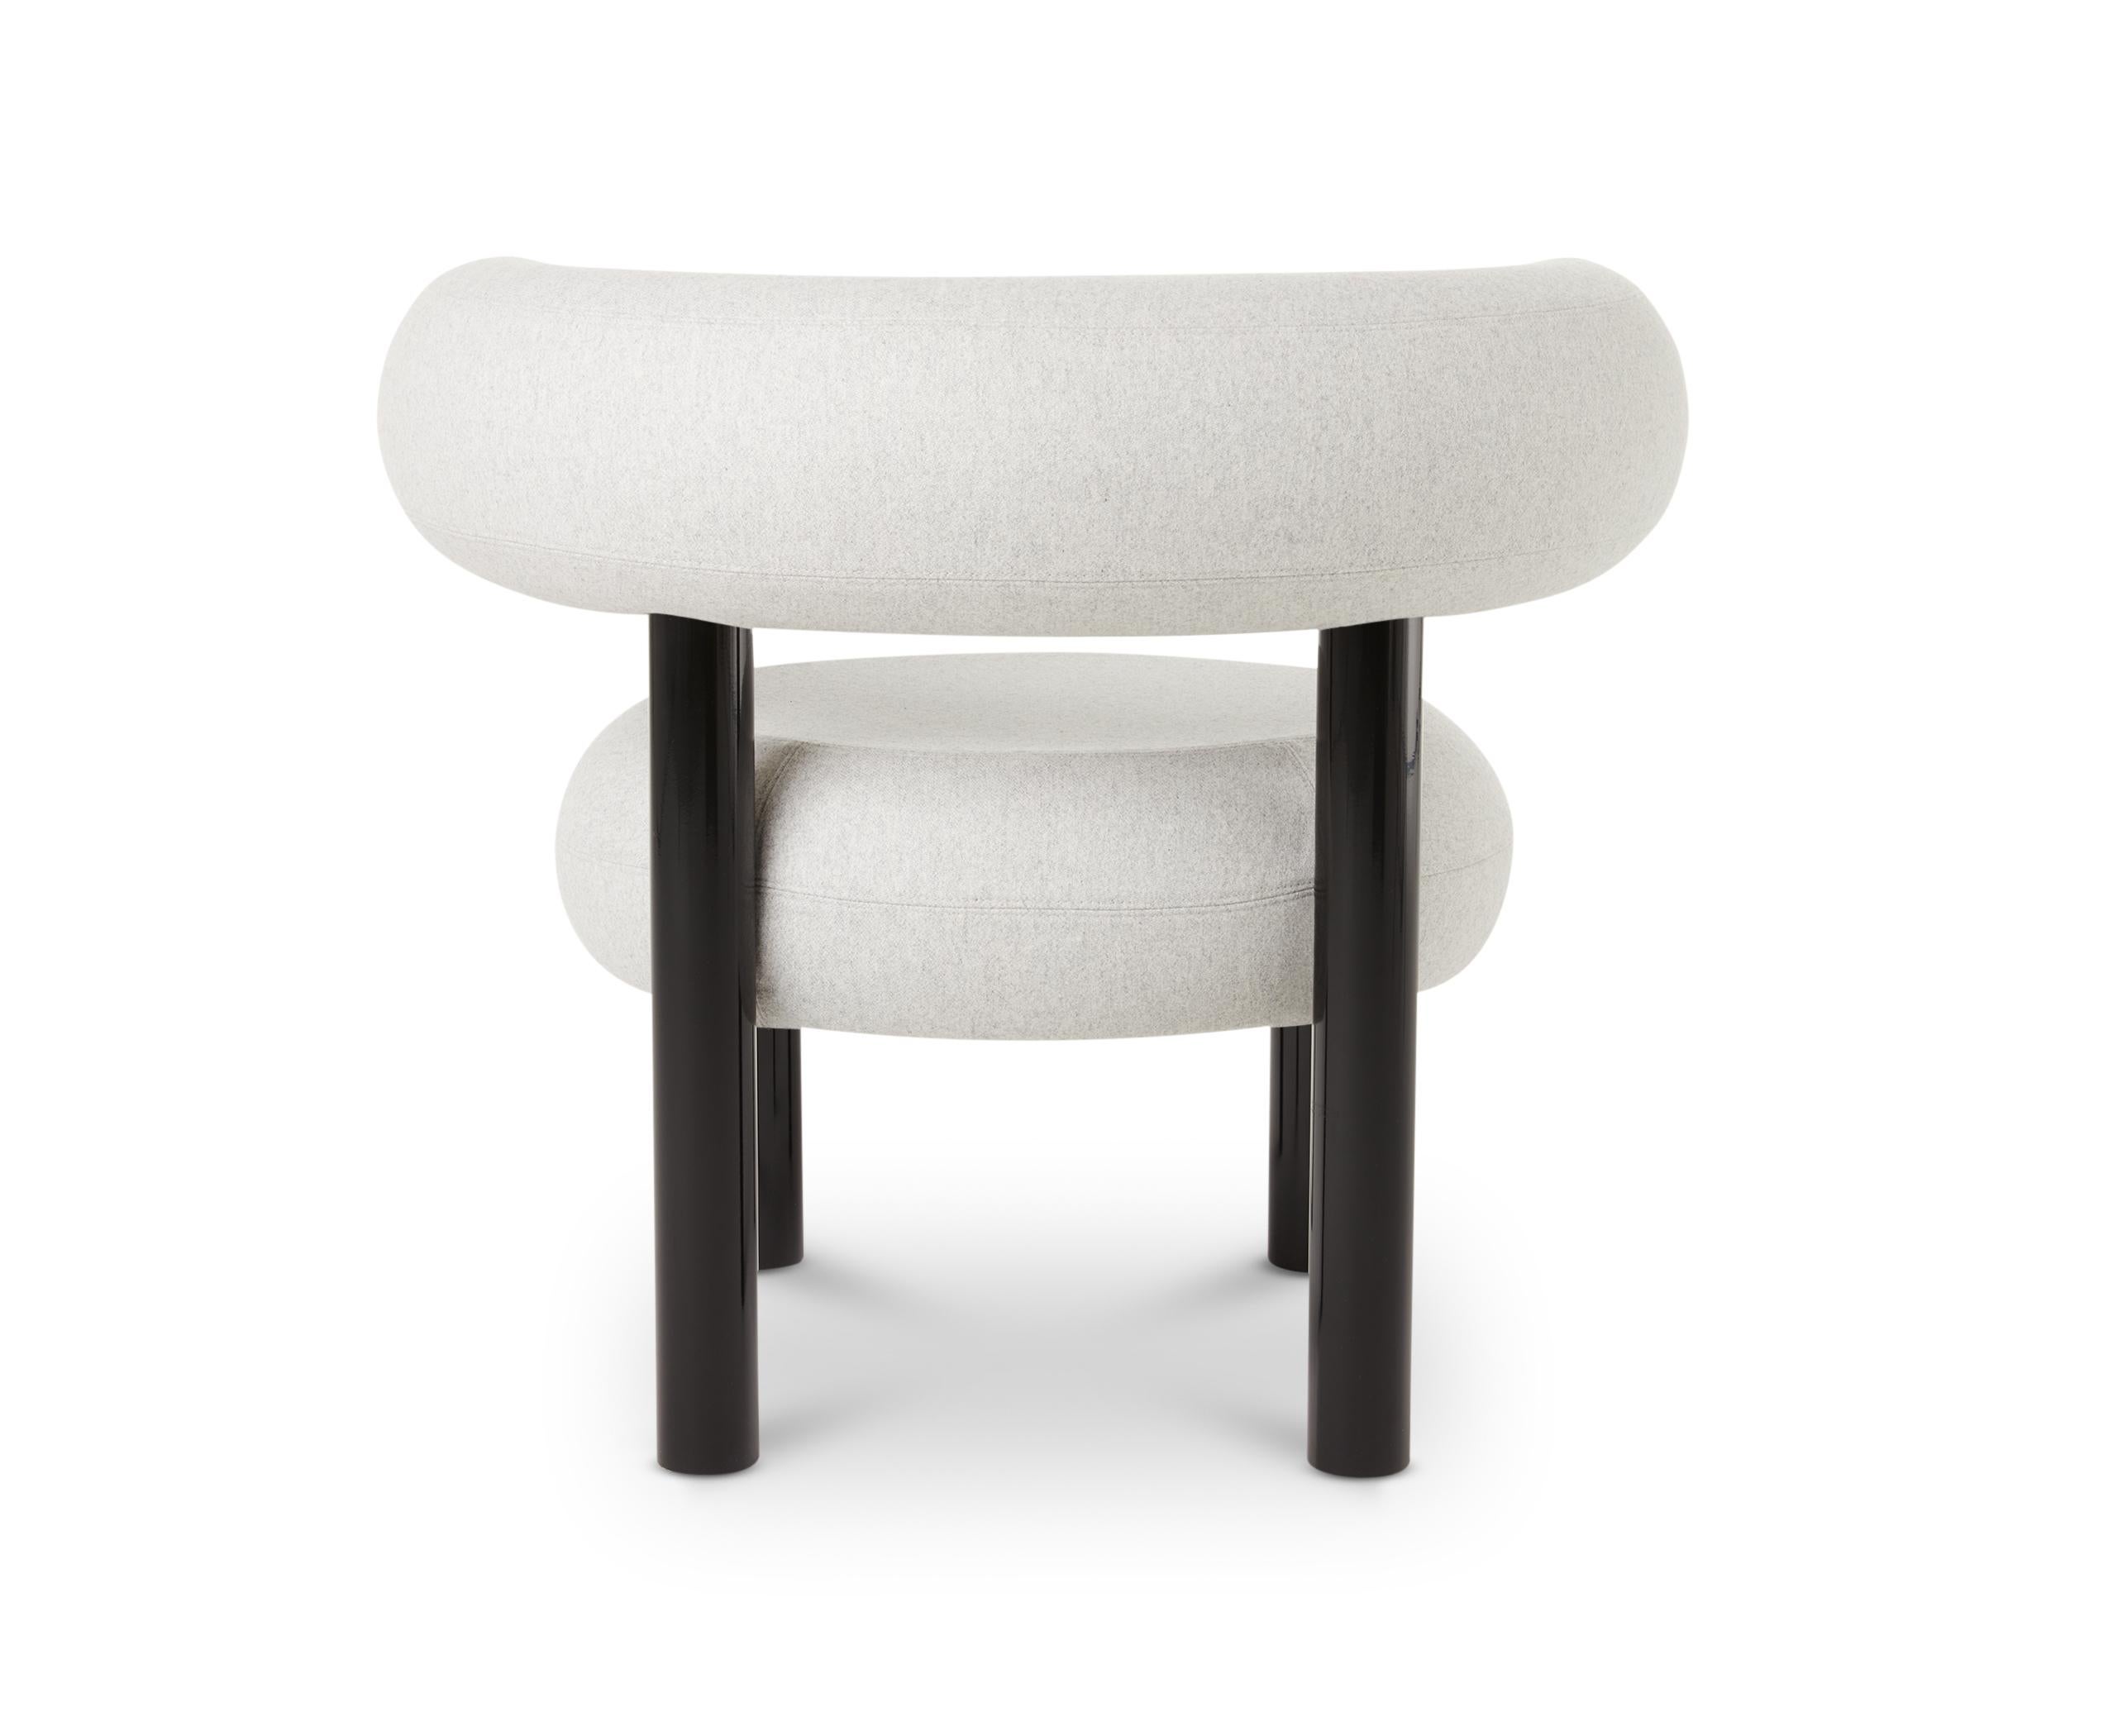 Gray (Mollie Melton 0103.jpg) FAT Lounge Chair with Black Legs by Tom Dixon 2